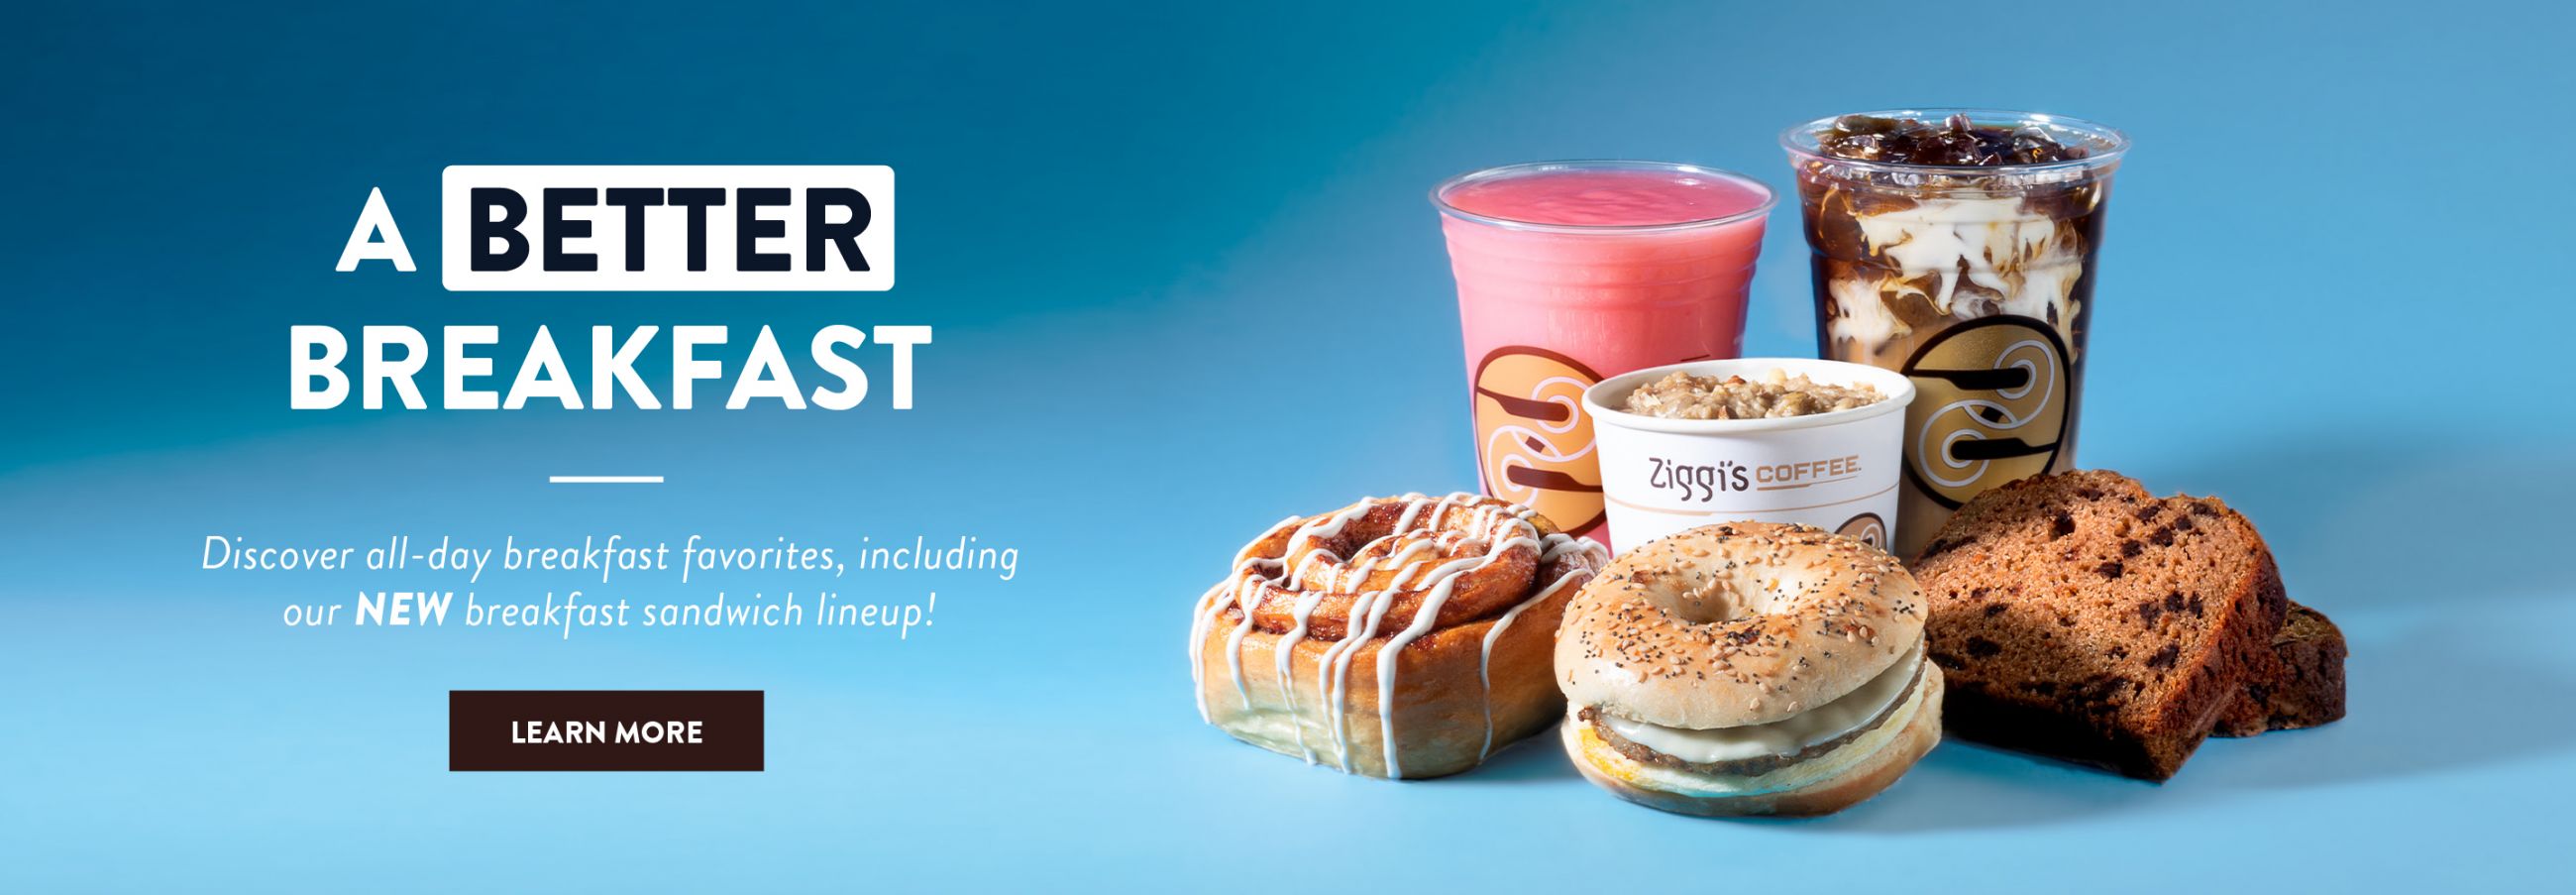 A Better Breakfast at Ziggi's Coffee with images of a breakfast sandwich, smoothie, oatmeal, bread slices and a coffee